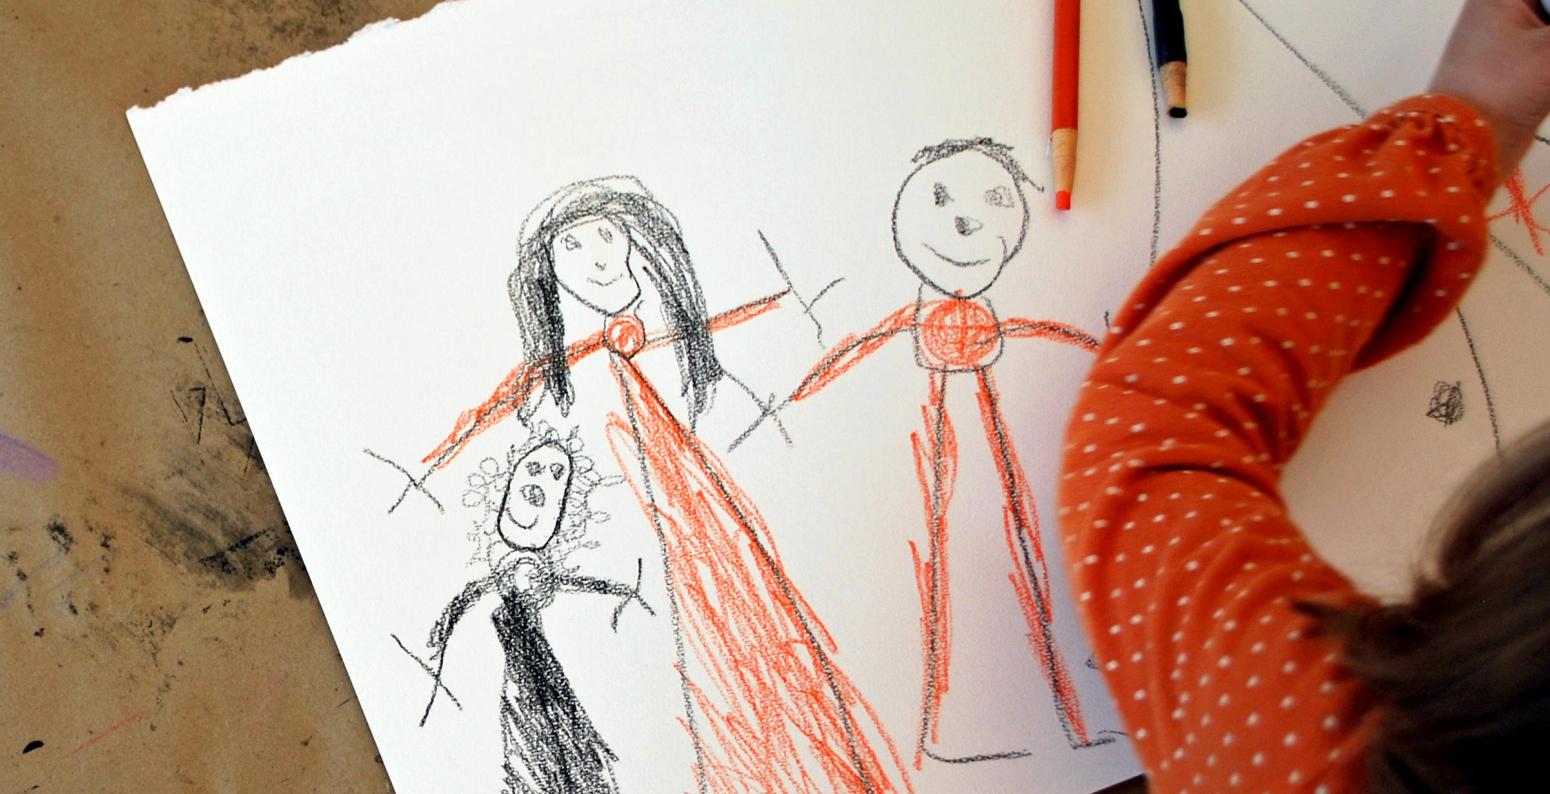 A child drawing three people on white paper using orange and black drawing tools.